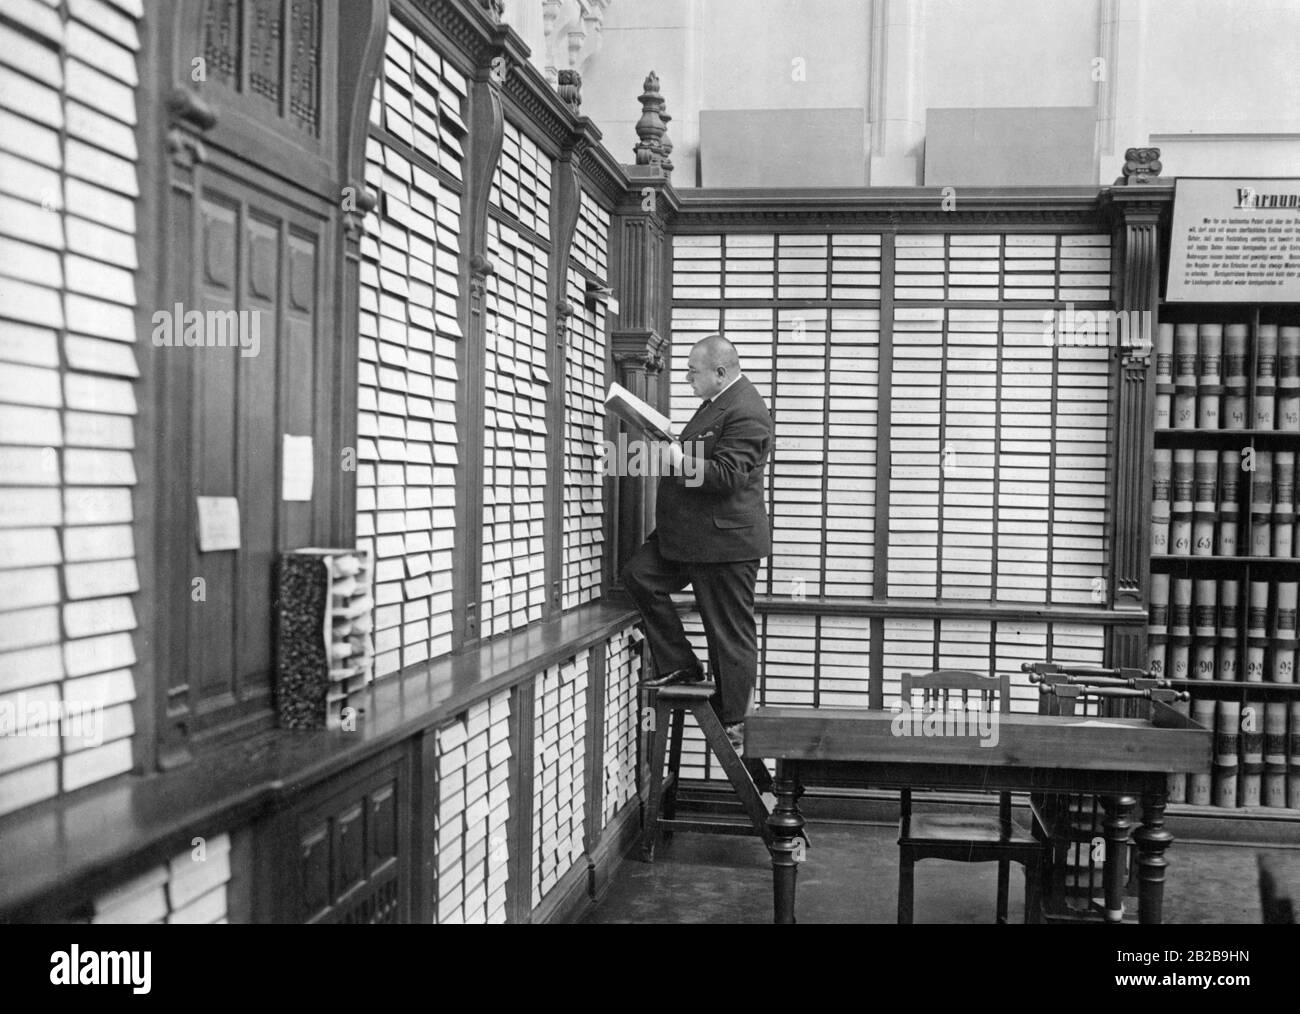 The rogues gallery at police headquarters - NYPL Digital Collections